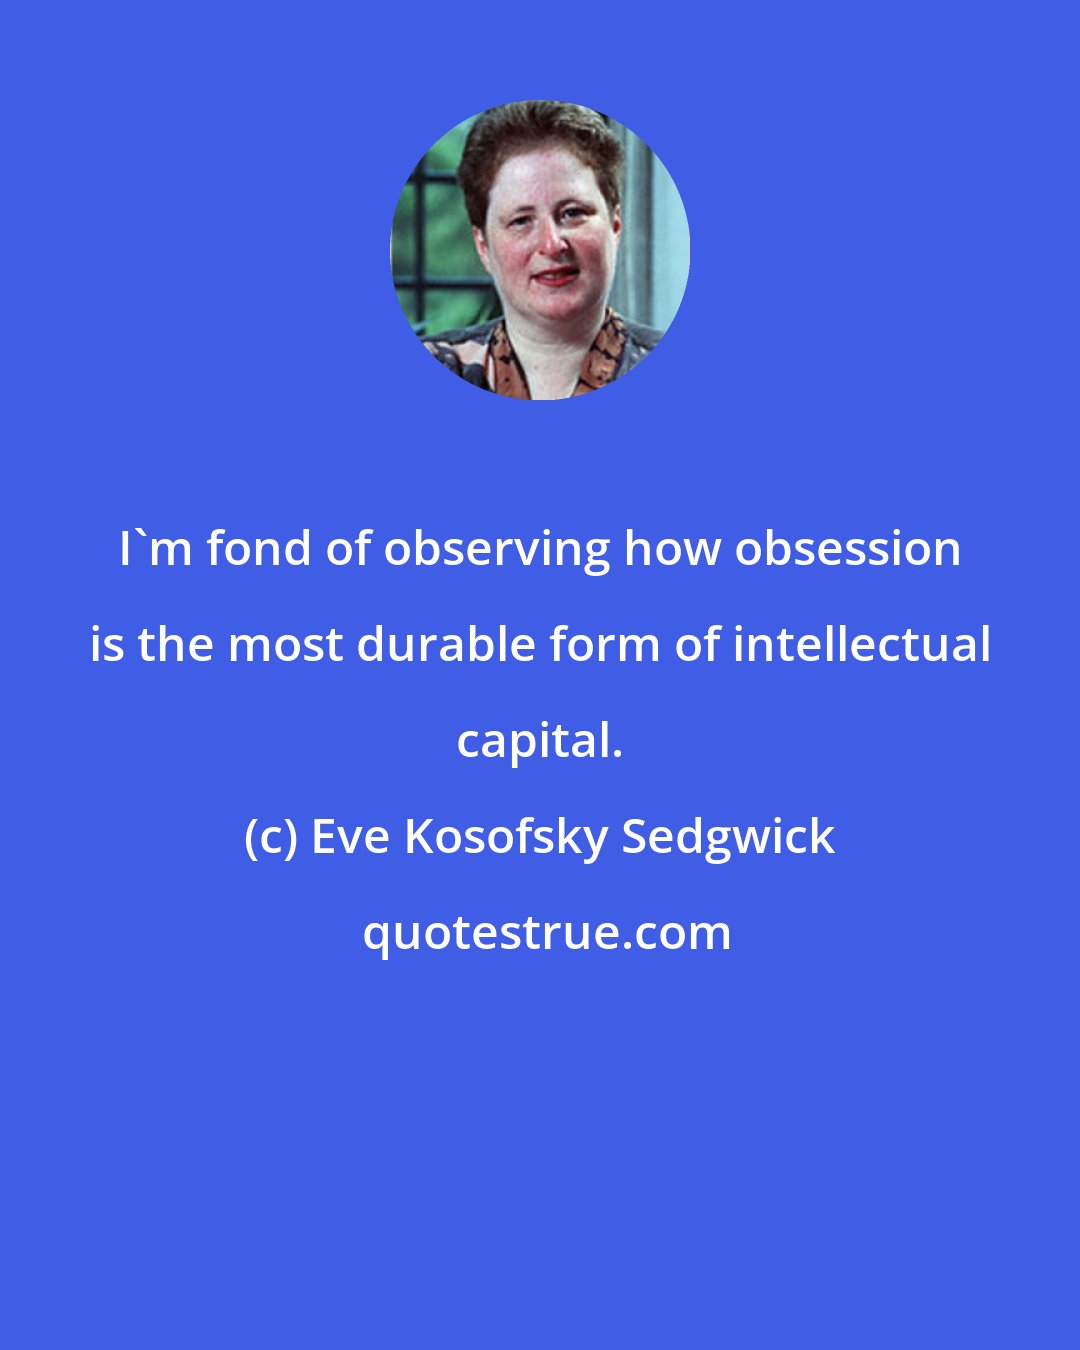 Eve Kosofsky Sedgwick: I'm fond of observing how obsession is the most durable form of intellectual capital.